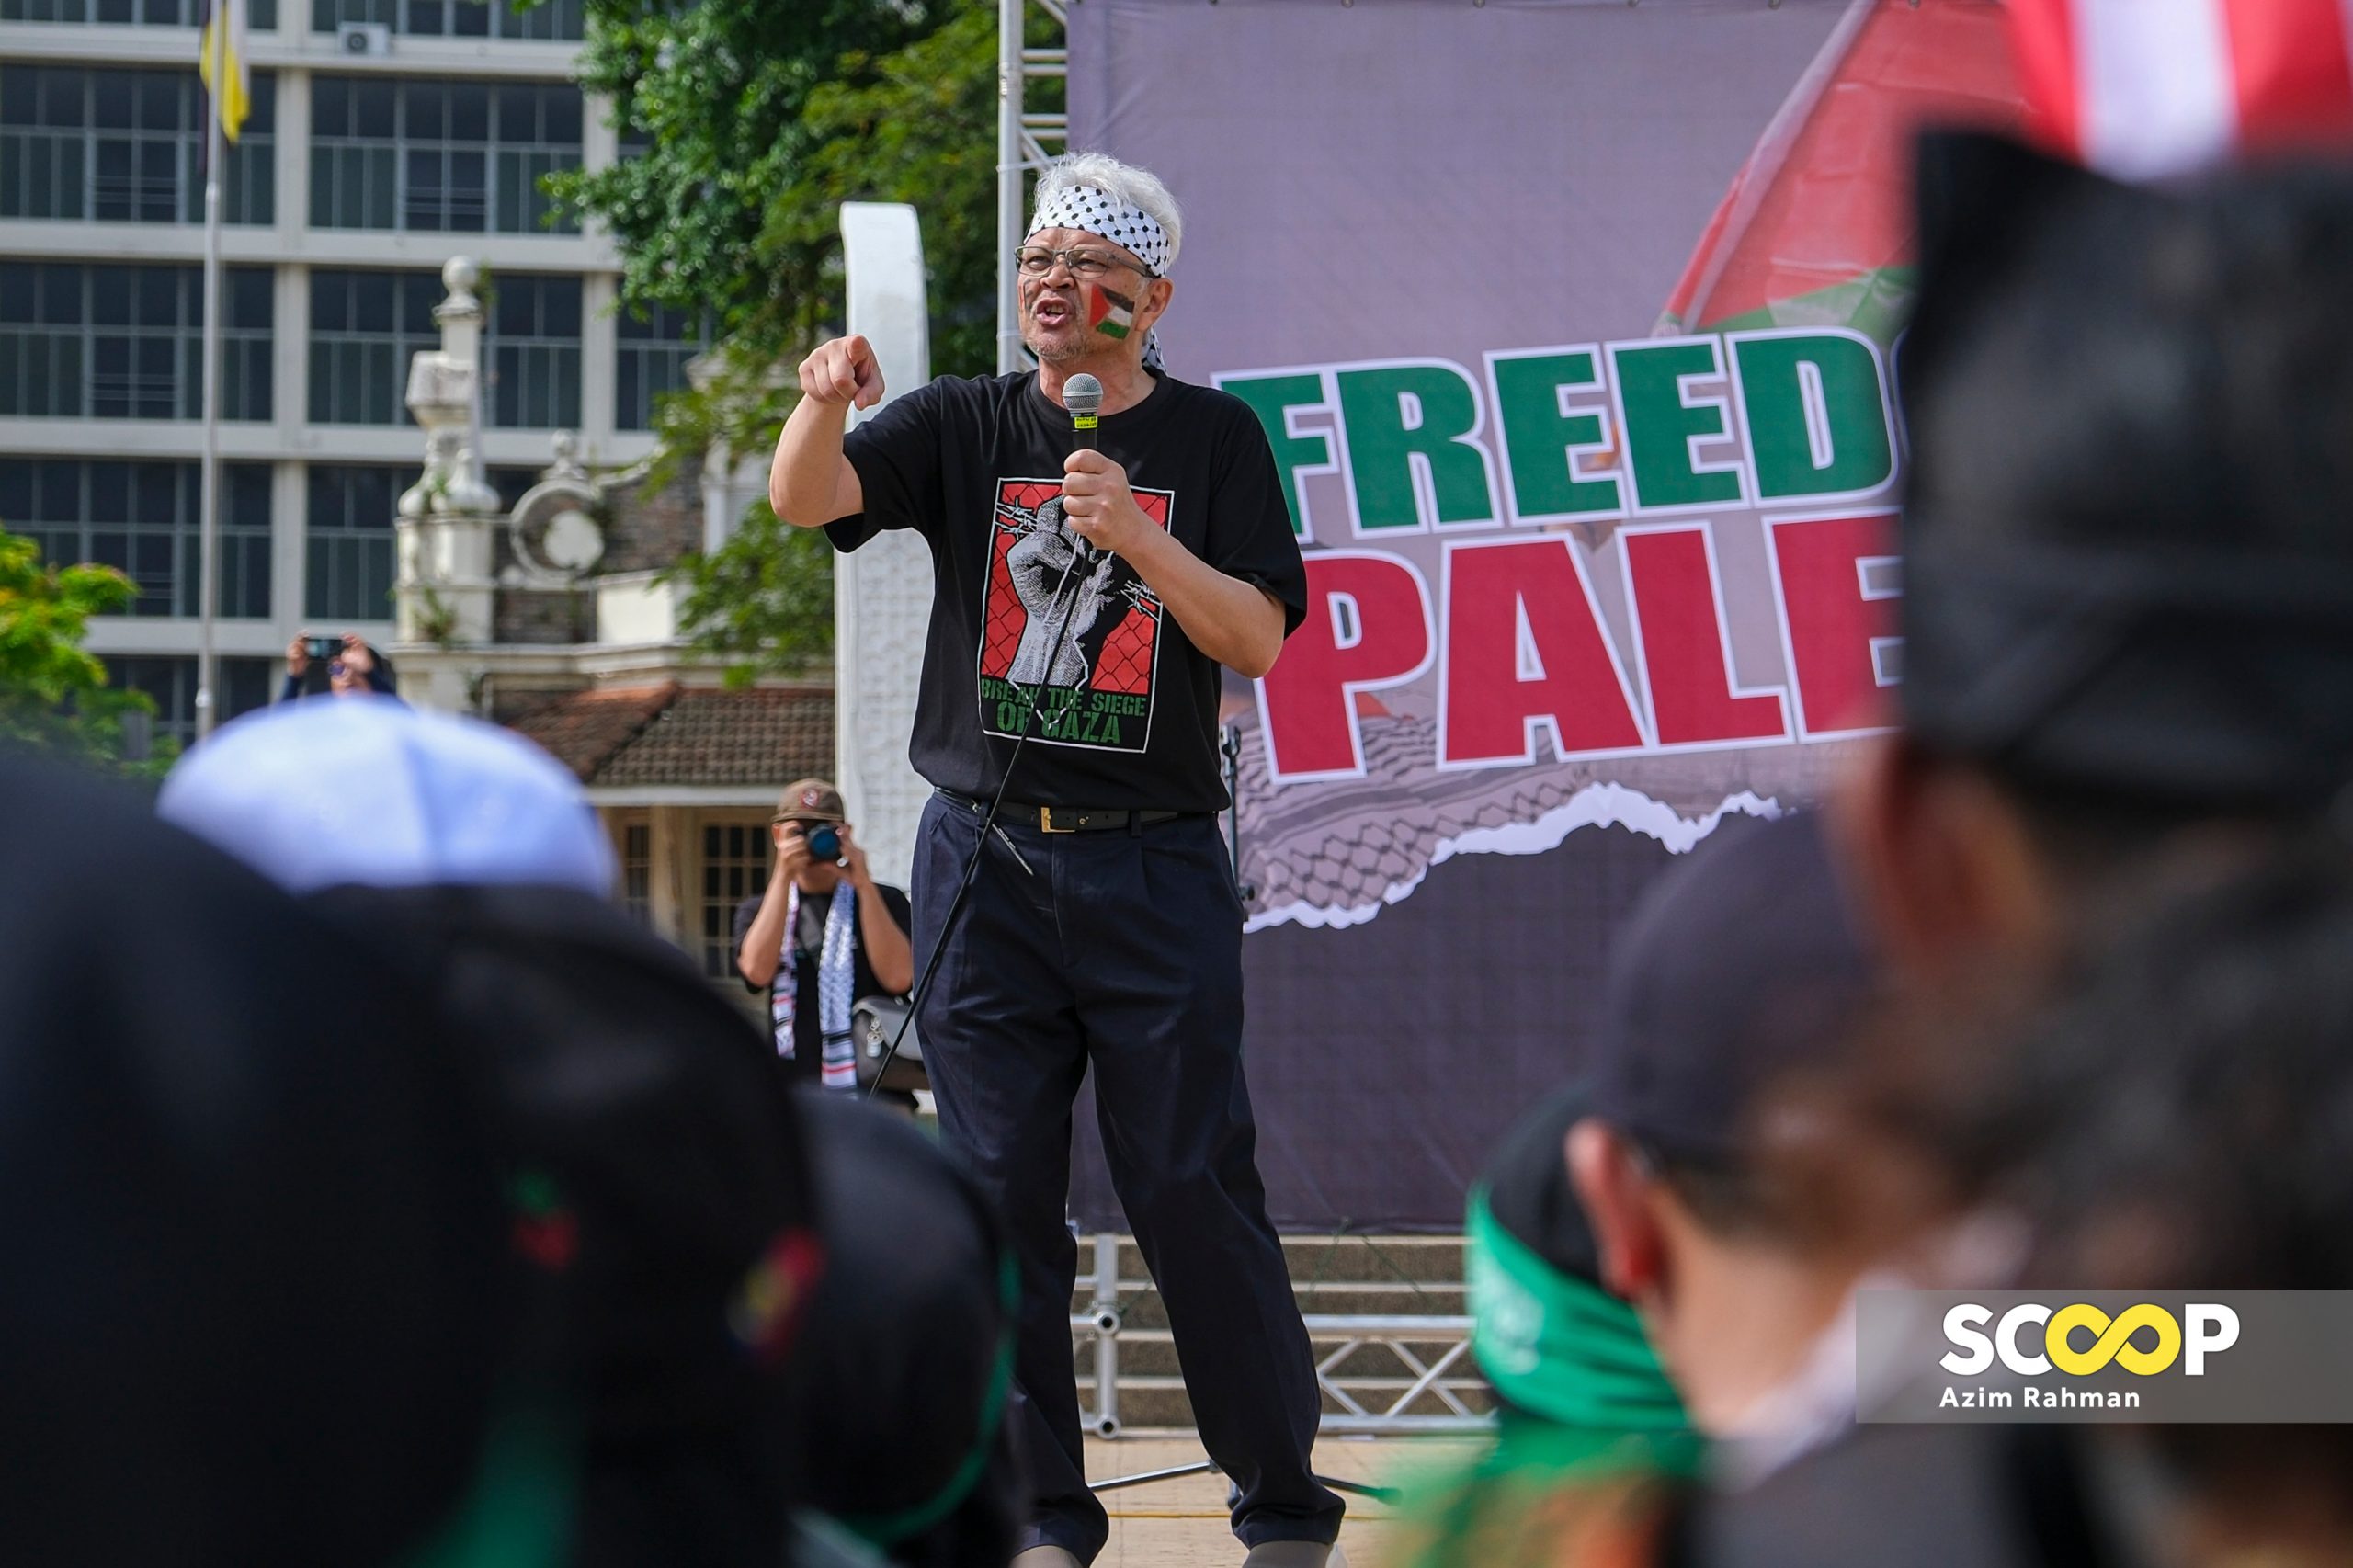 Viva Palestina M’sia chair says sorry but stands by action against ‘agent provocateurs’